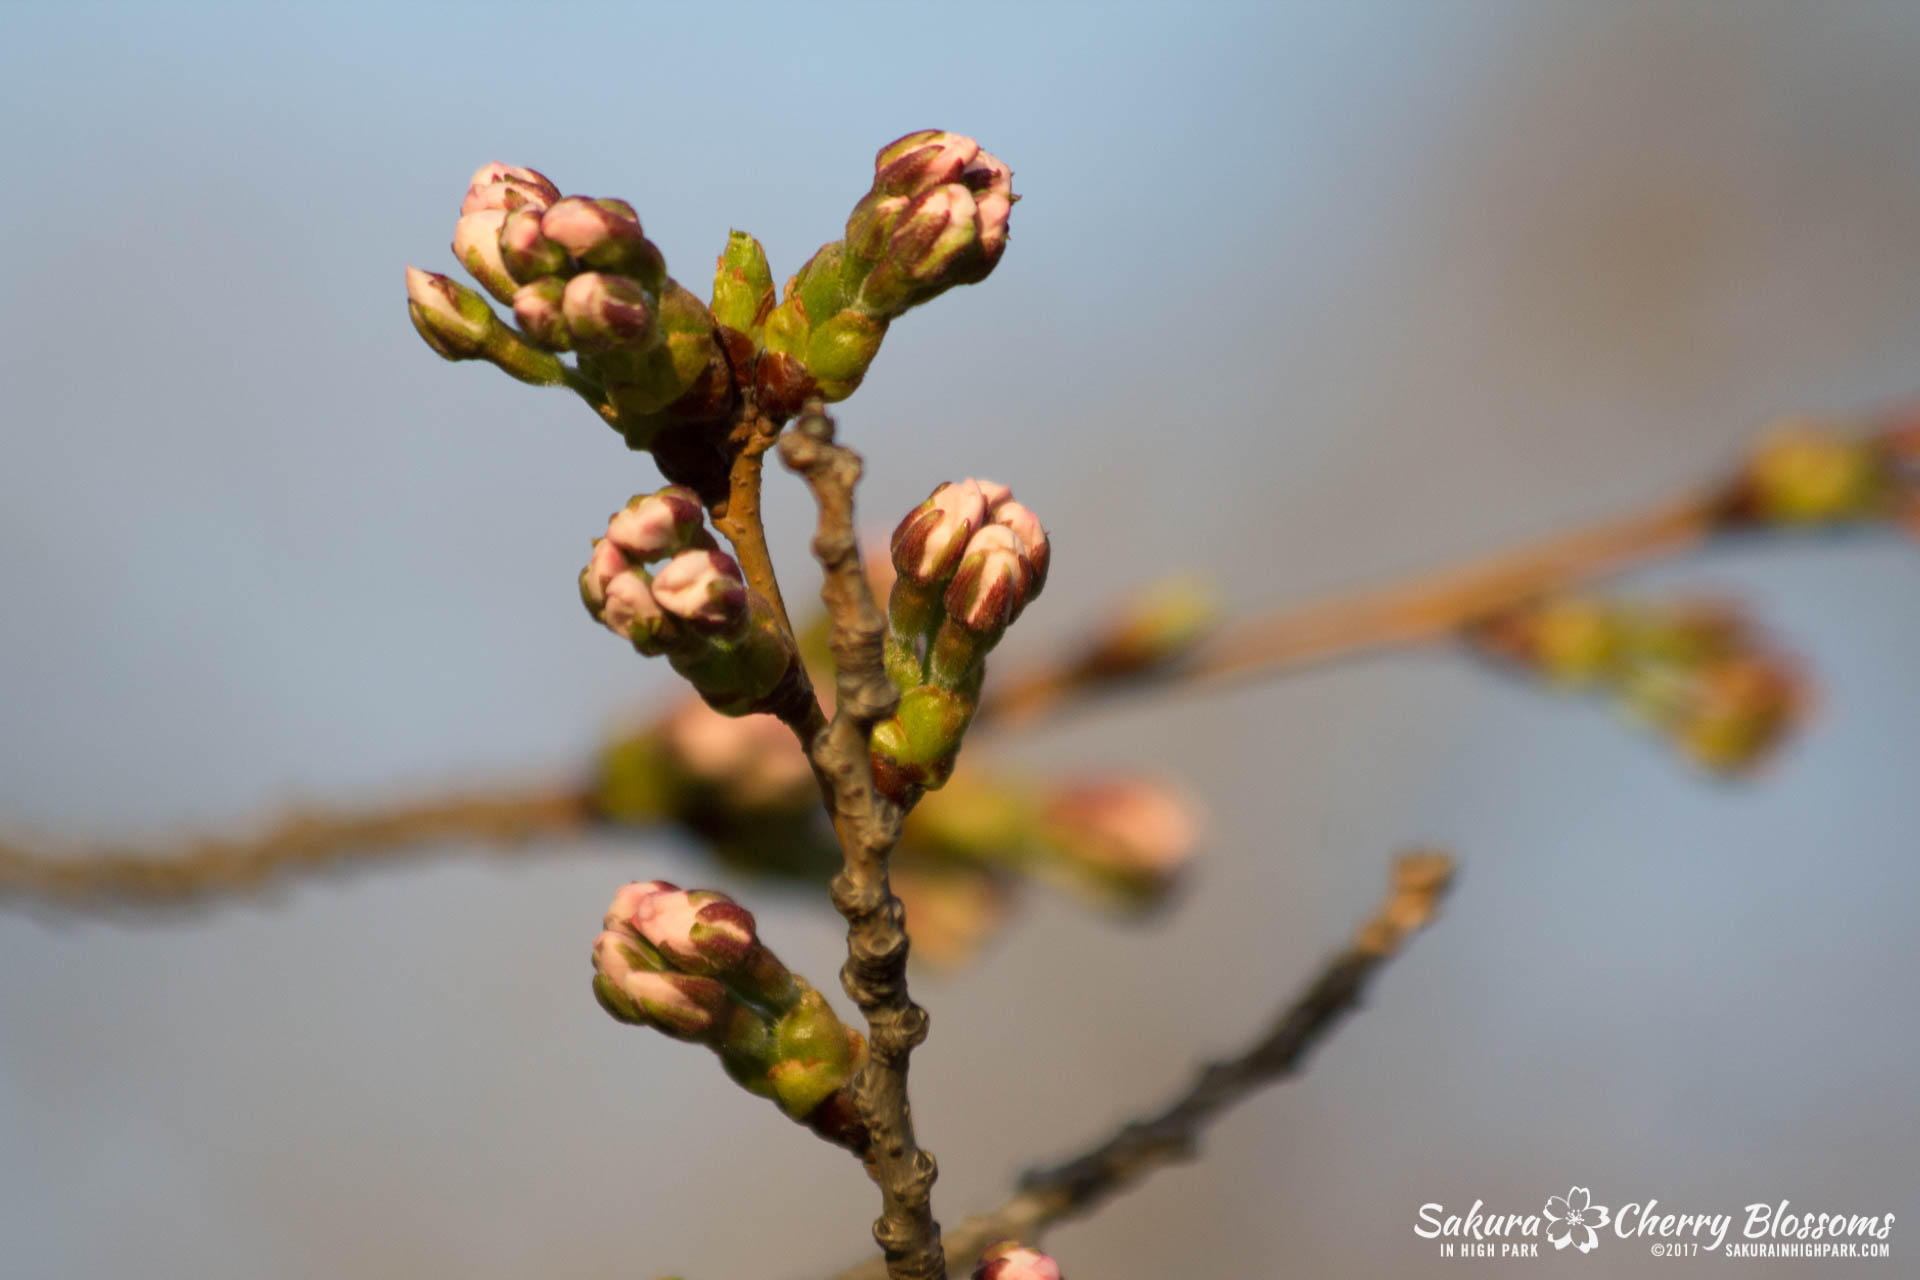 Sakura-in-High-Park-April-17-2017-florets-are-emerging-from-the-buds-throughout-the-park-80.jpg